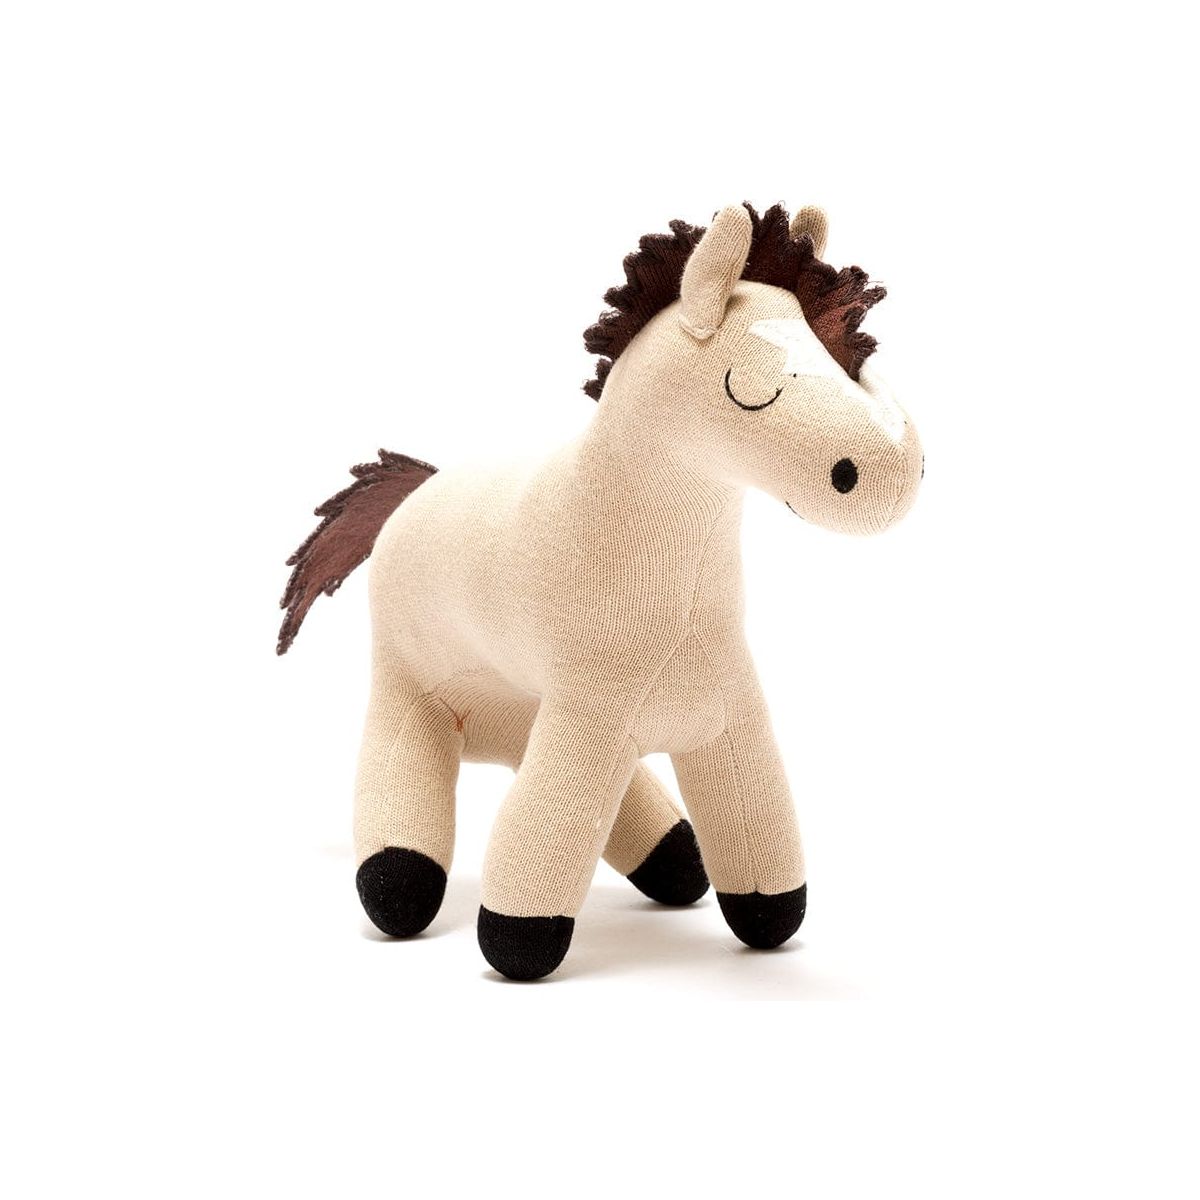 Best Years Ltd Knitted Organic Cotton Horse Soft Toy